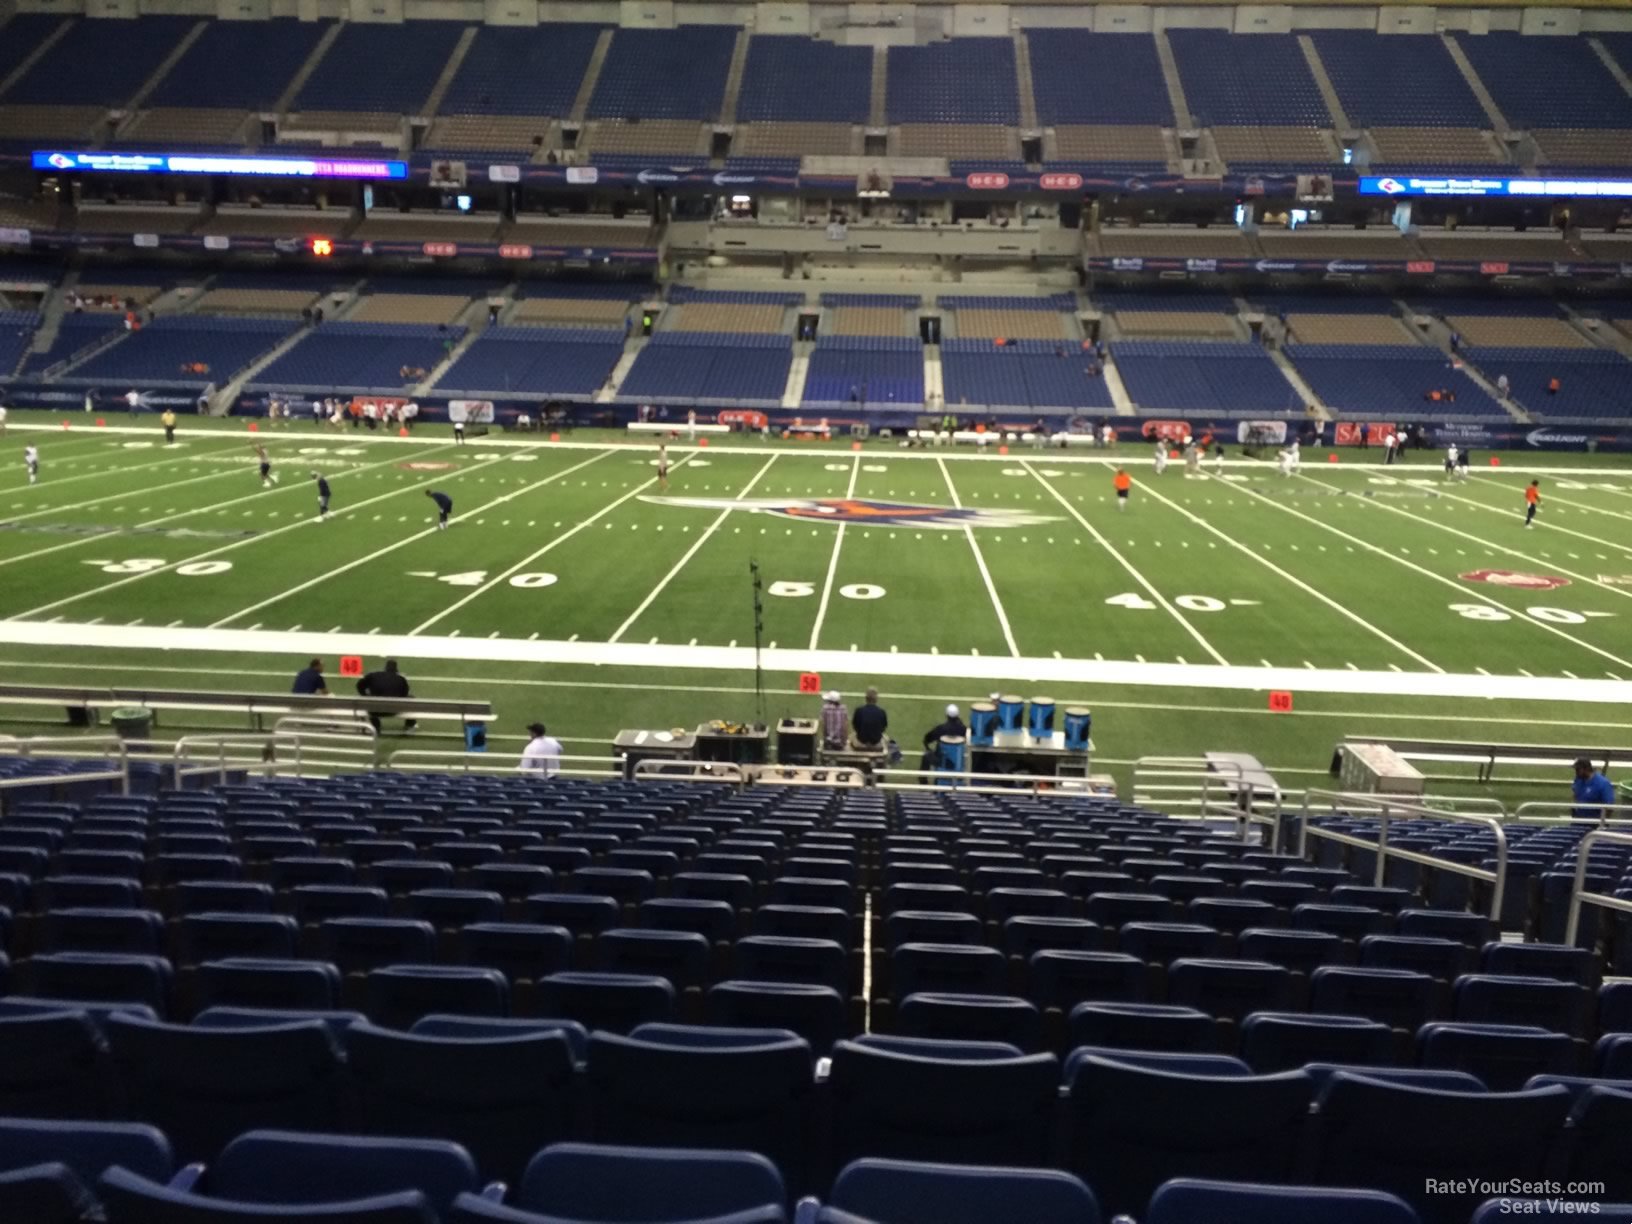 section 134, row 18 seat view  for football - alamodome